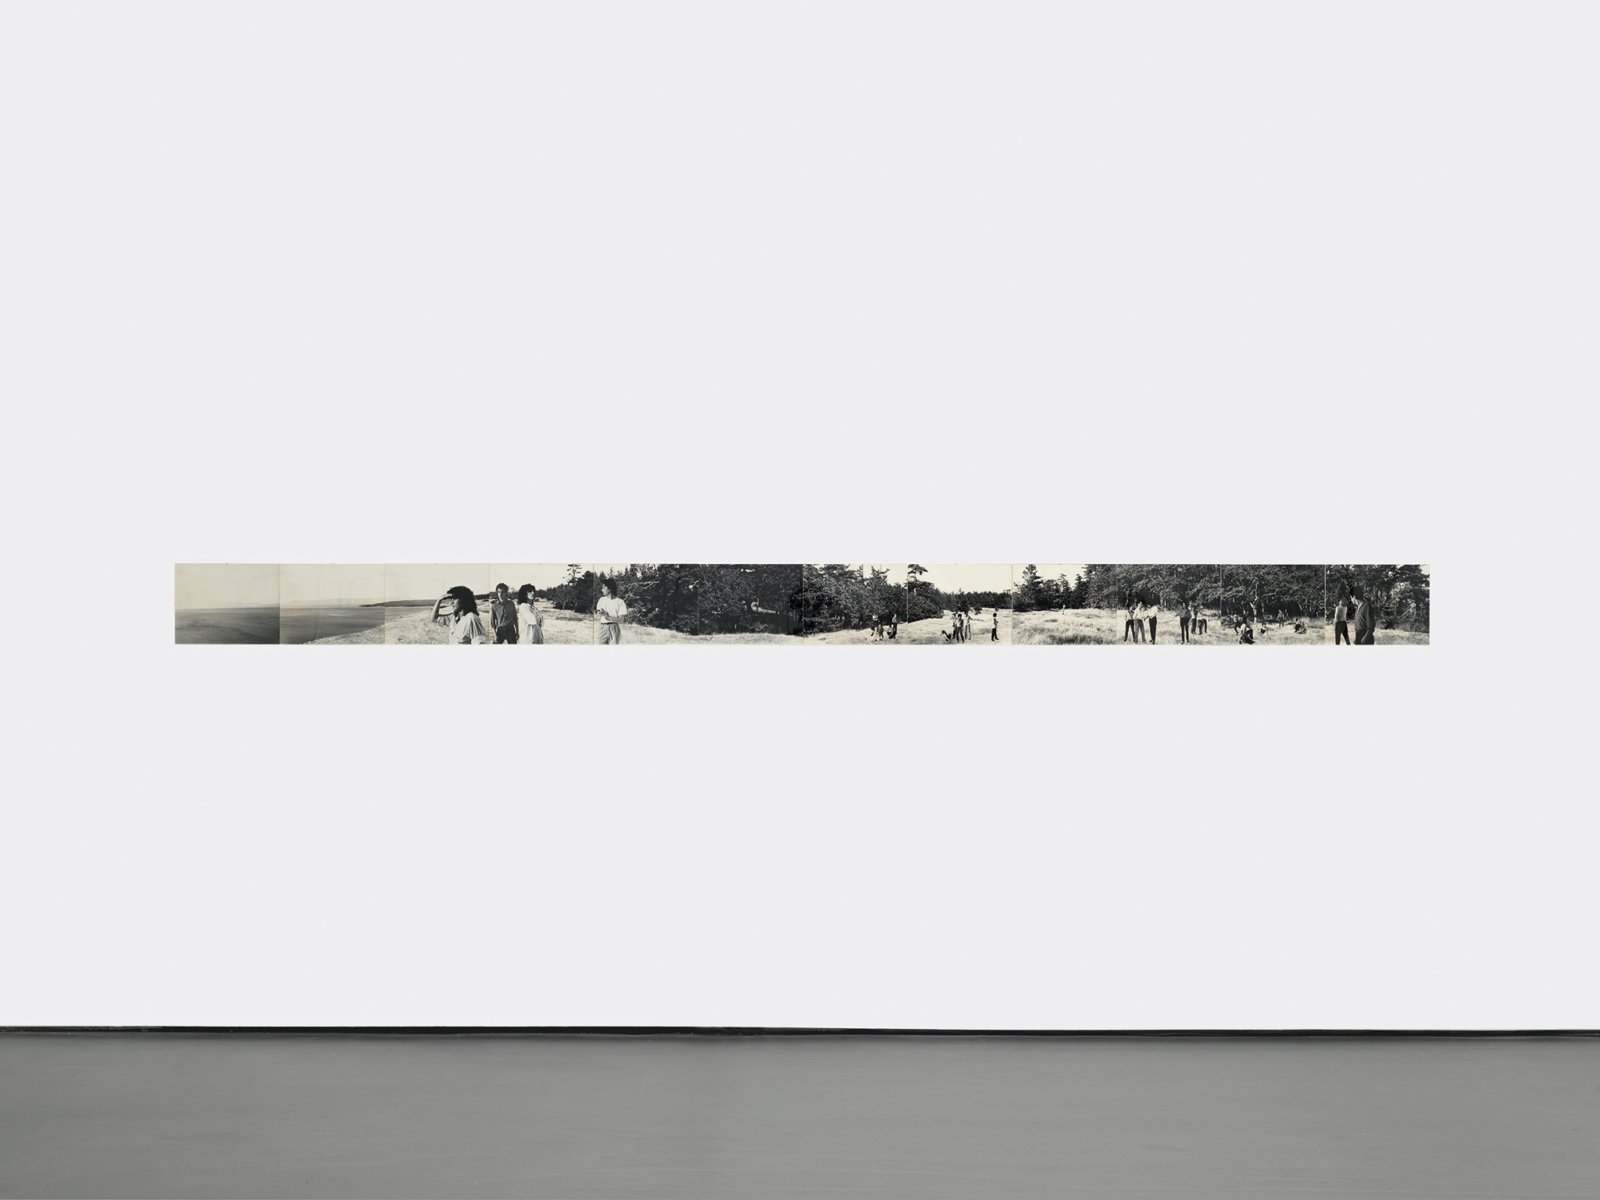 Ian Wallace, Maquette for Lookout, 1979, vintage silver gelatin print, 11 x 163 in. (27 x 414 cm)